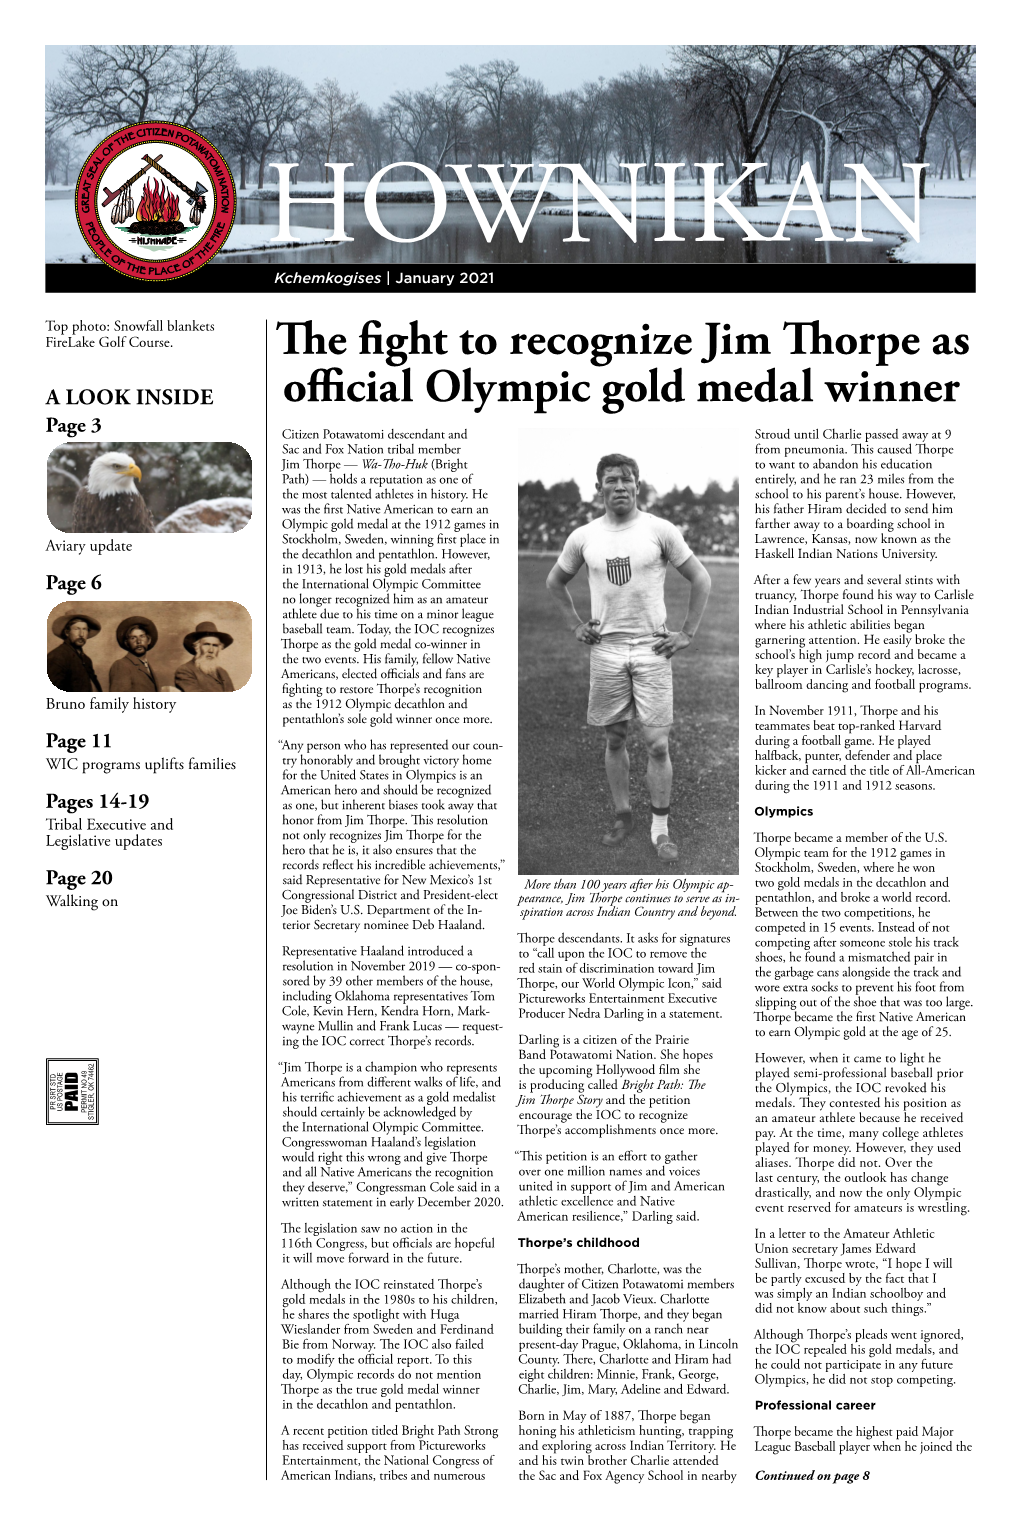 The Fight to Recognize Jim Thorpe As Official Olympic Gold Medal Winner